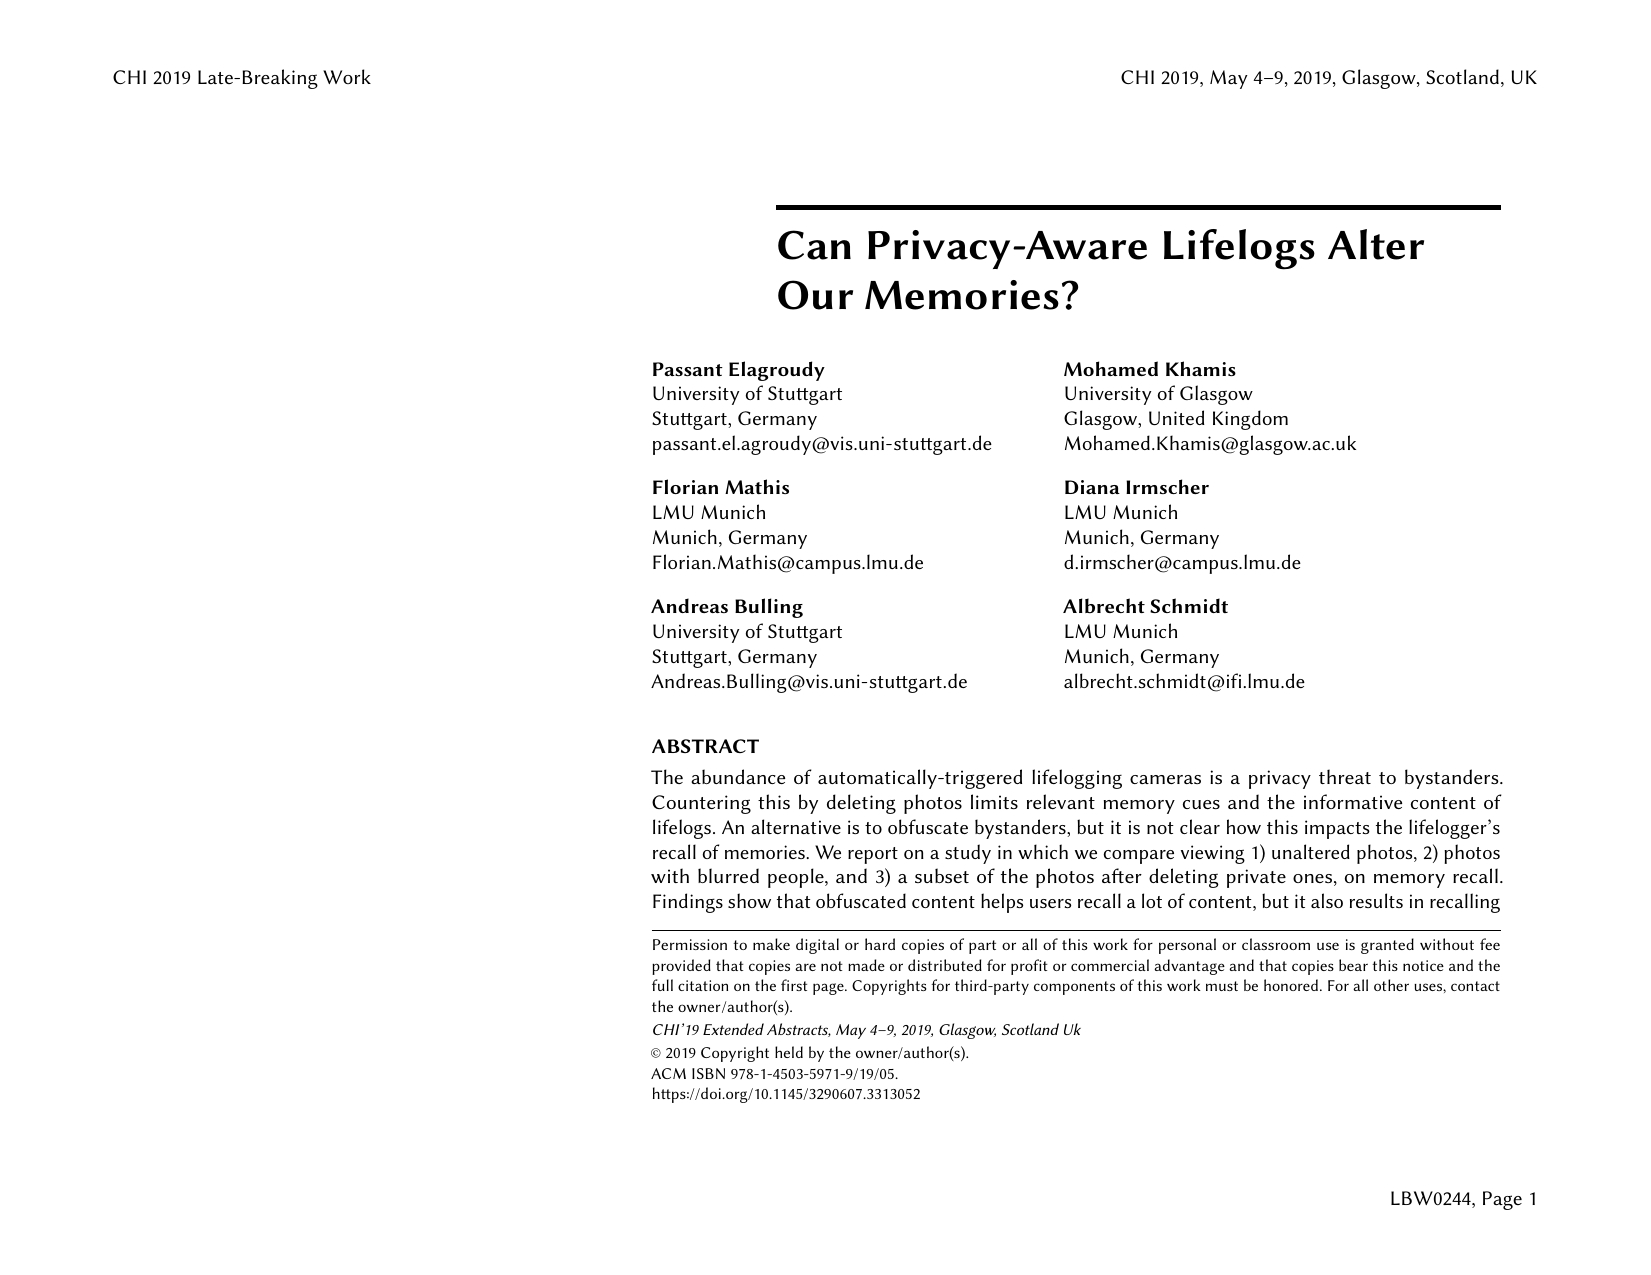 Can Privacy-Aware Lifelogs Alter Our Memories?